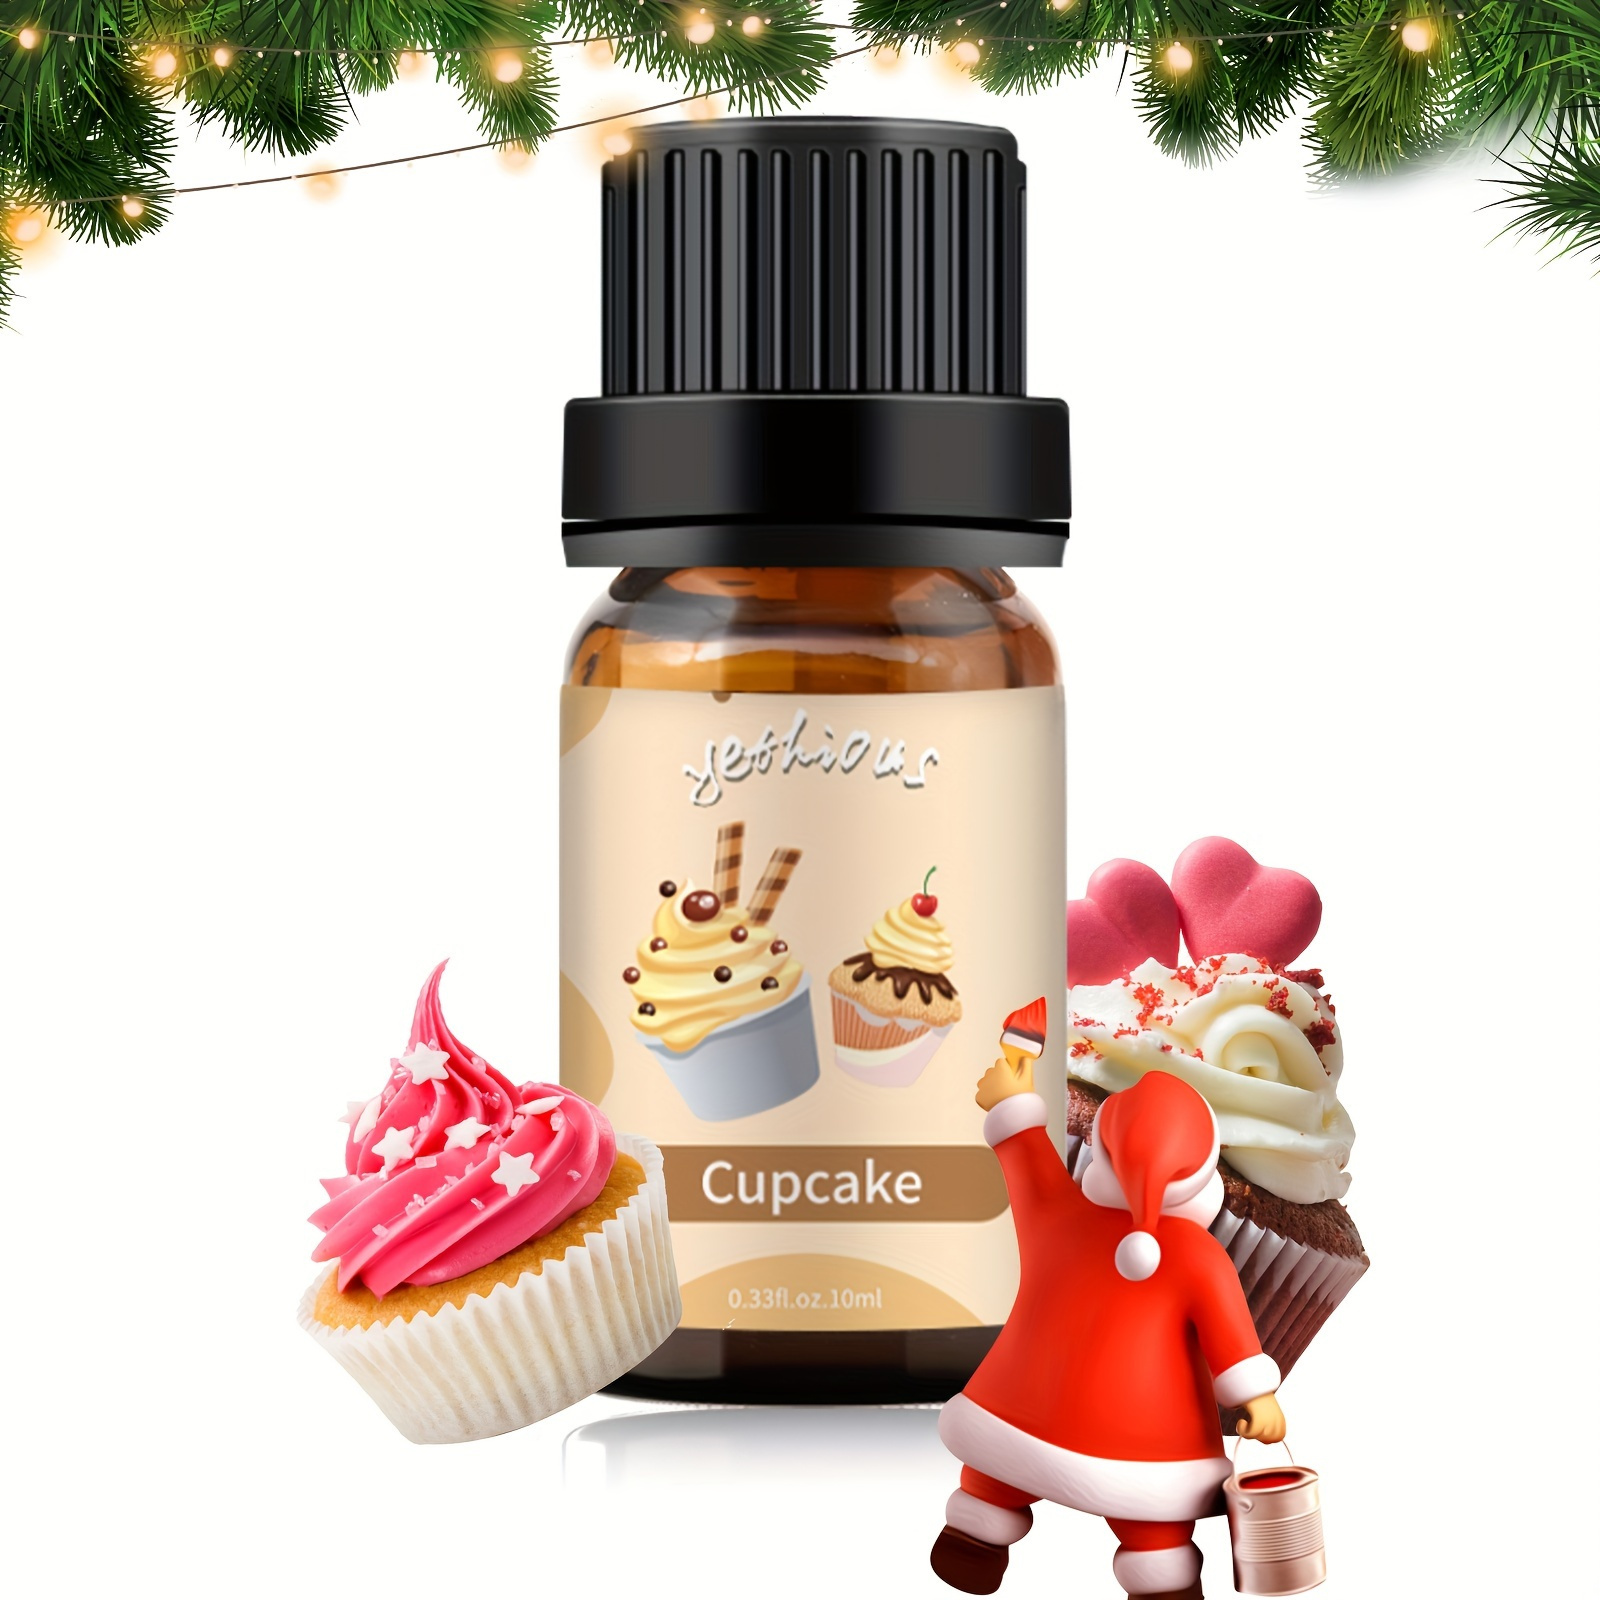  NP Natures Philosophy 2 Pack Cupcake Coffee Cake Essential Oil,  100% Pure Organic Essential Oils for Diffuser, Aromatherapy, Massage, Soap  Making - 10ML : Health & Household